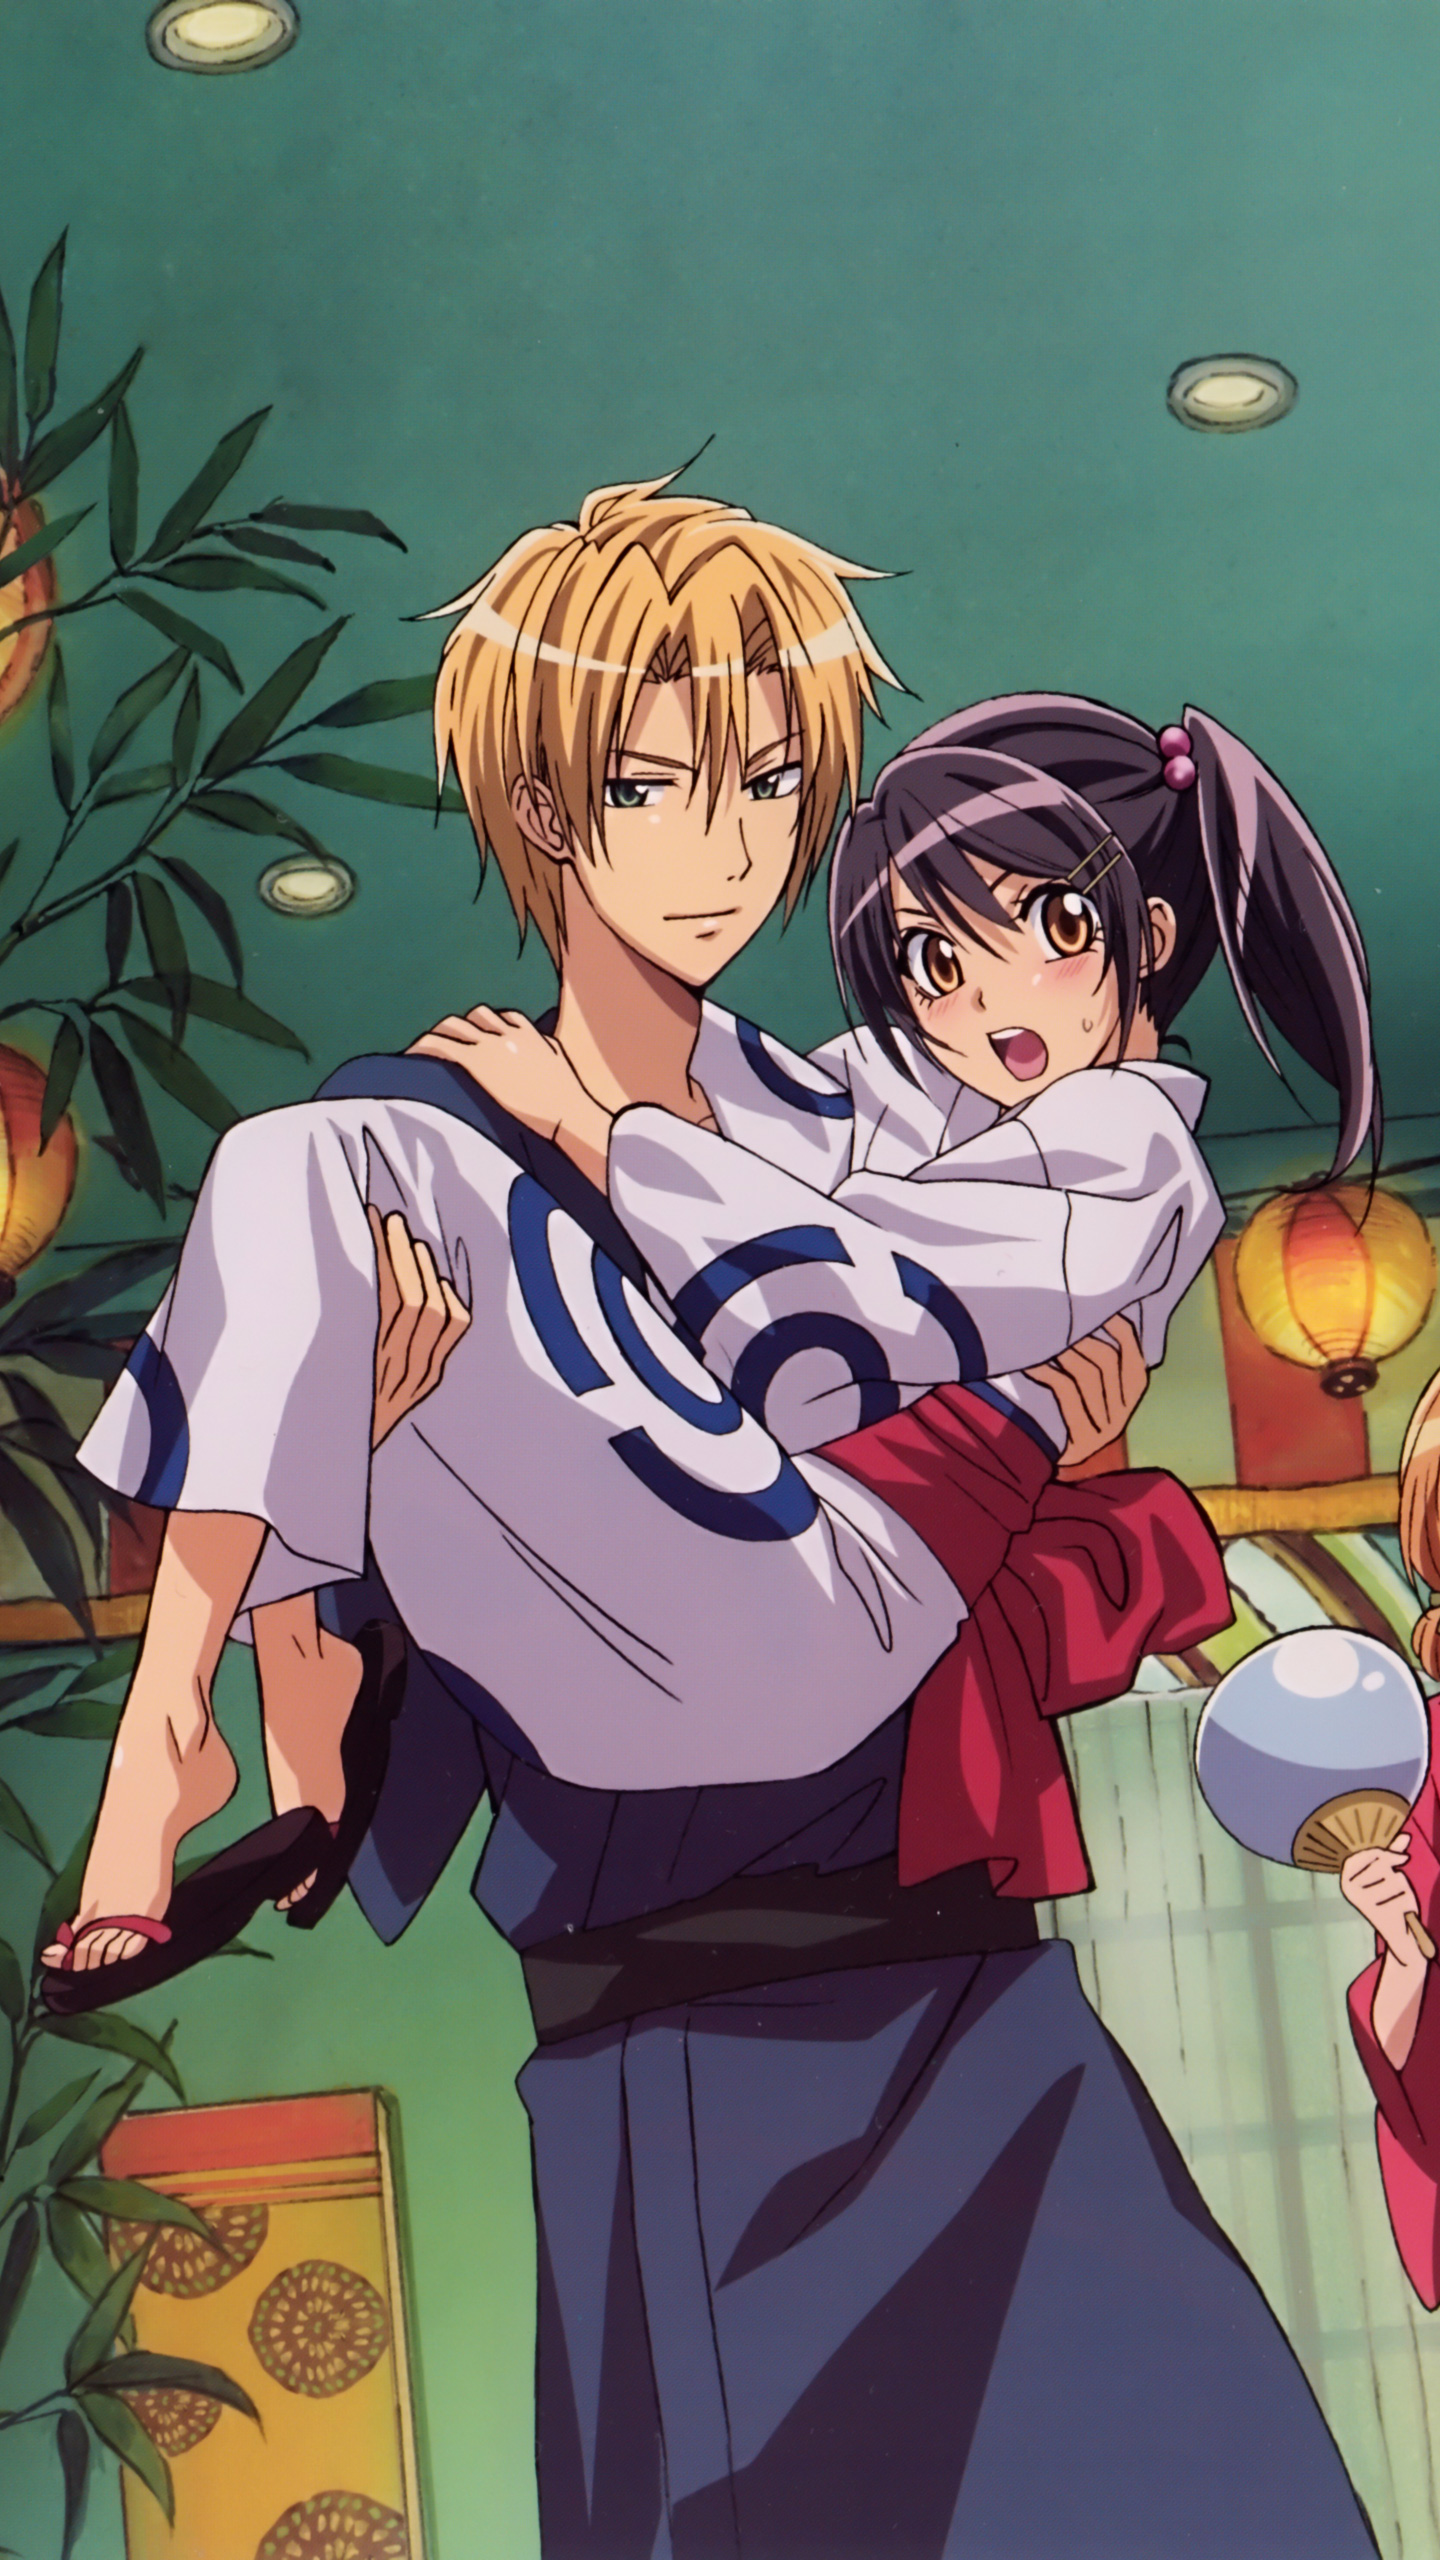 Download All In This Section - Kaichou Wa Maid Sama Saison , HD Wallpaper & Backgrounds